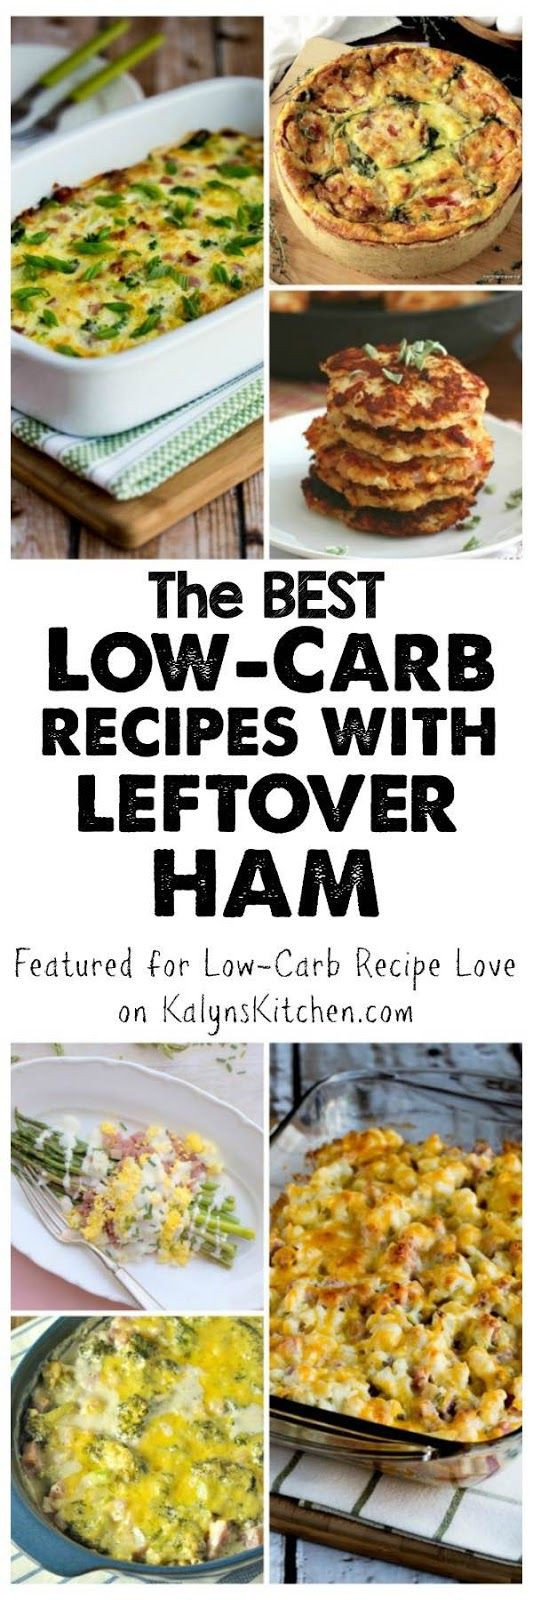 Low Carb Ham Recipes
 7331 best The Best Keto Recipes images on Pinterest